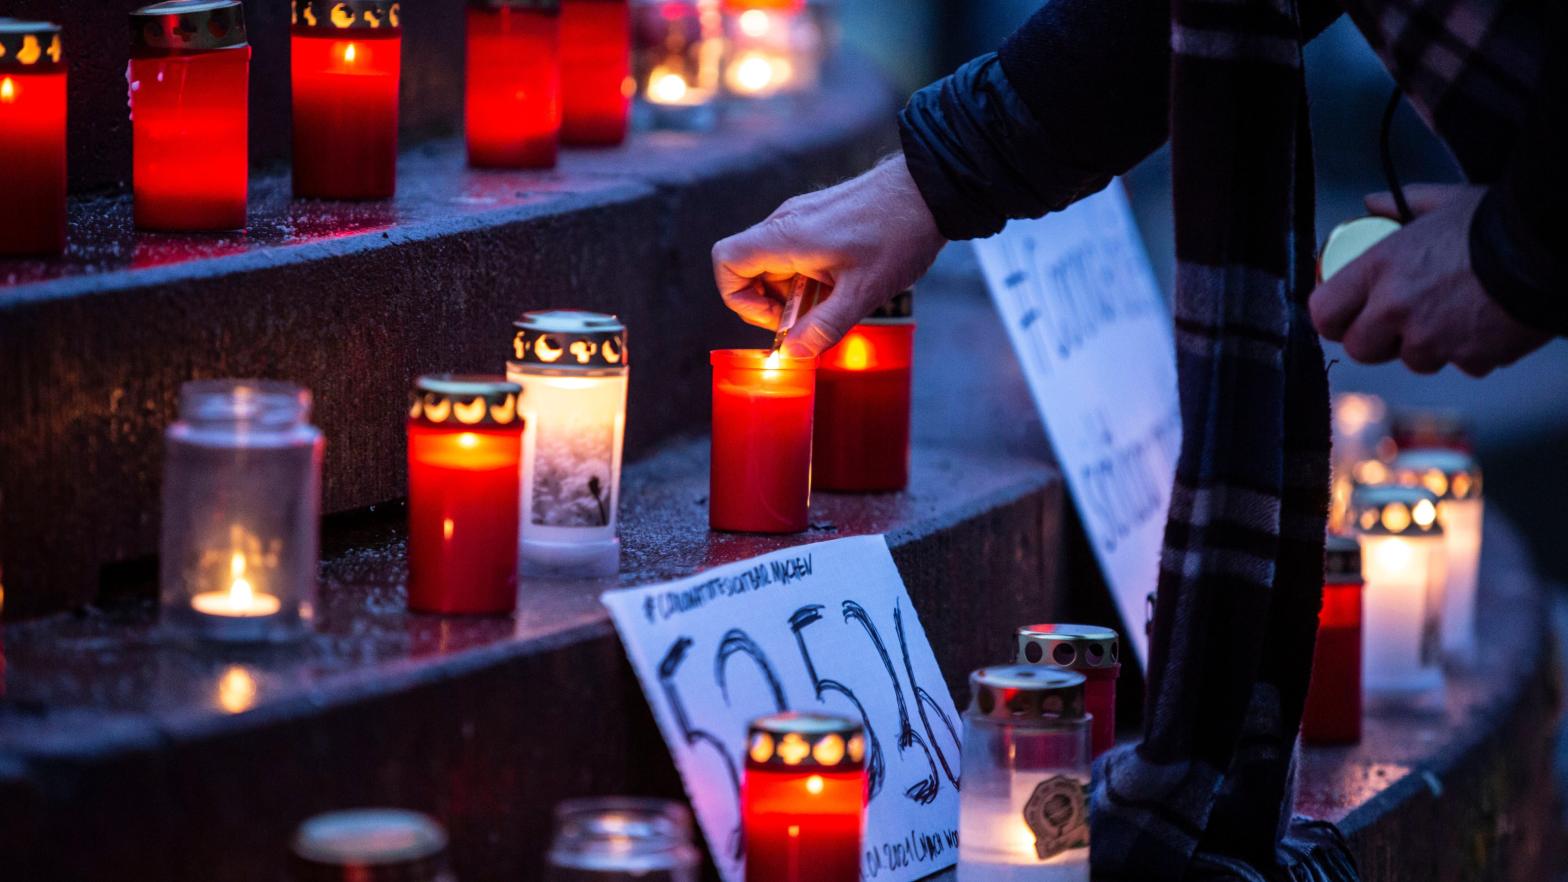 People attending a makeshift memorial for covid-19 victims at Arnswalder Platz on January 24, 2021 in Berlin, Germany. (Photo: Omer Messinger, Getty Images)